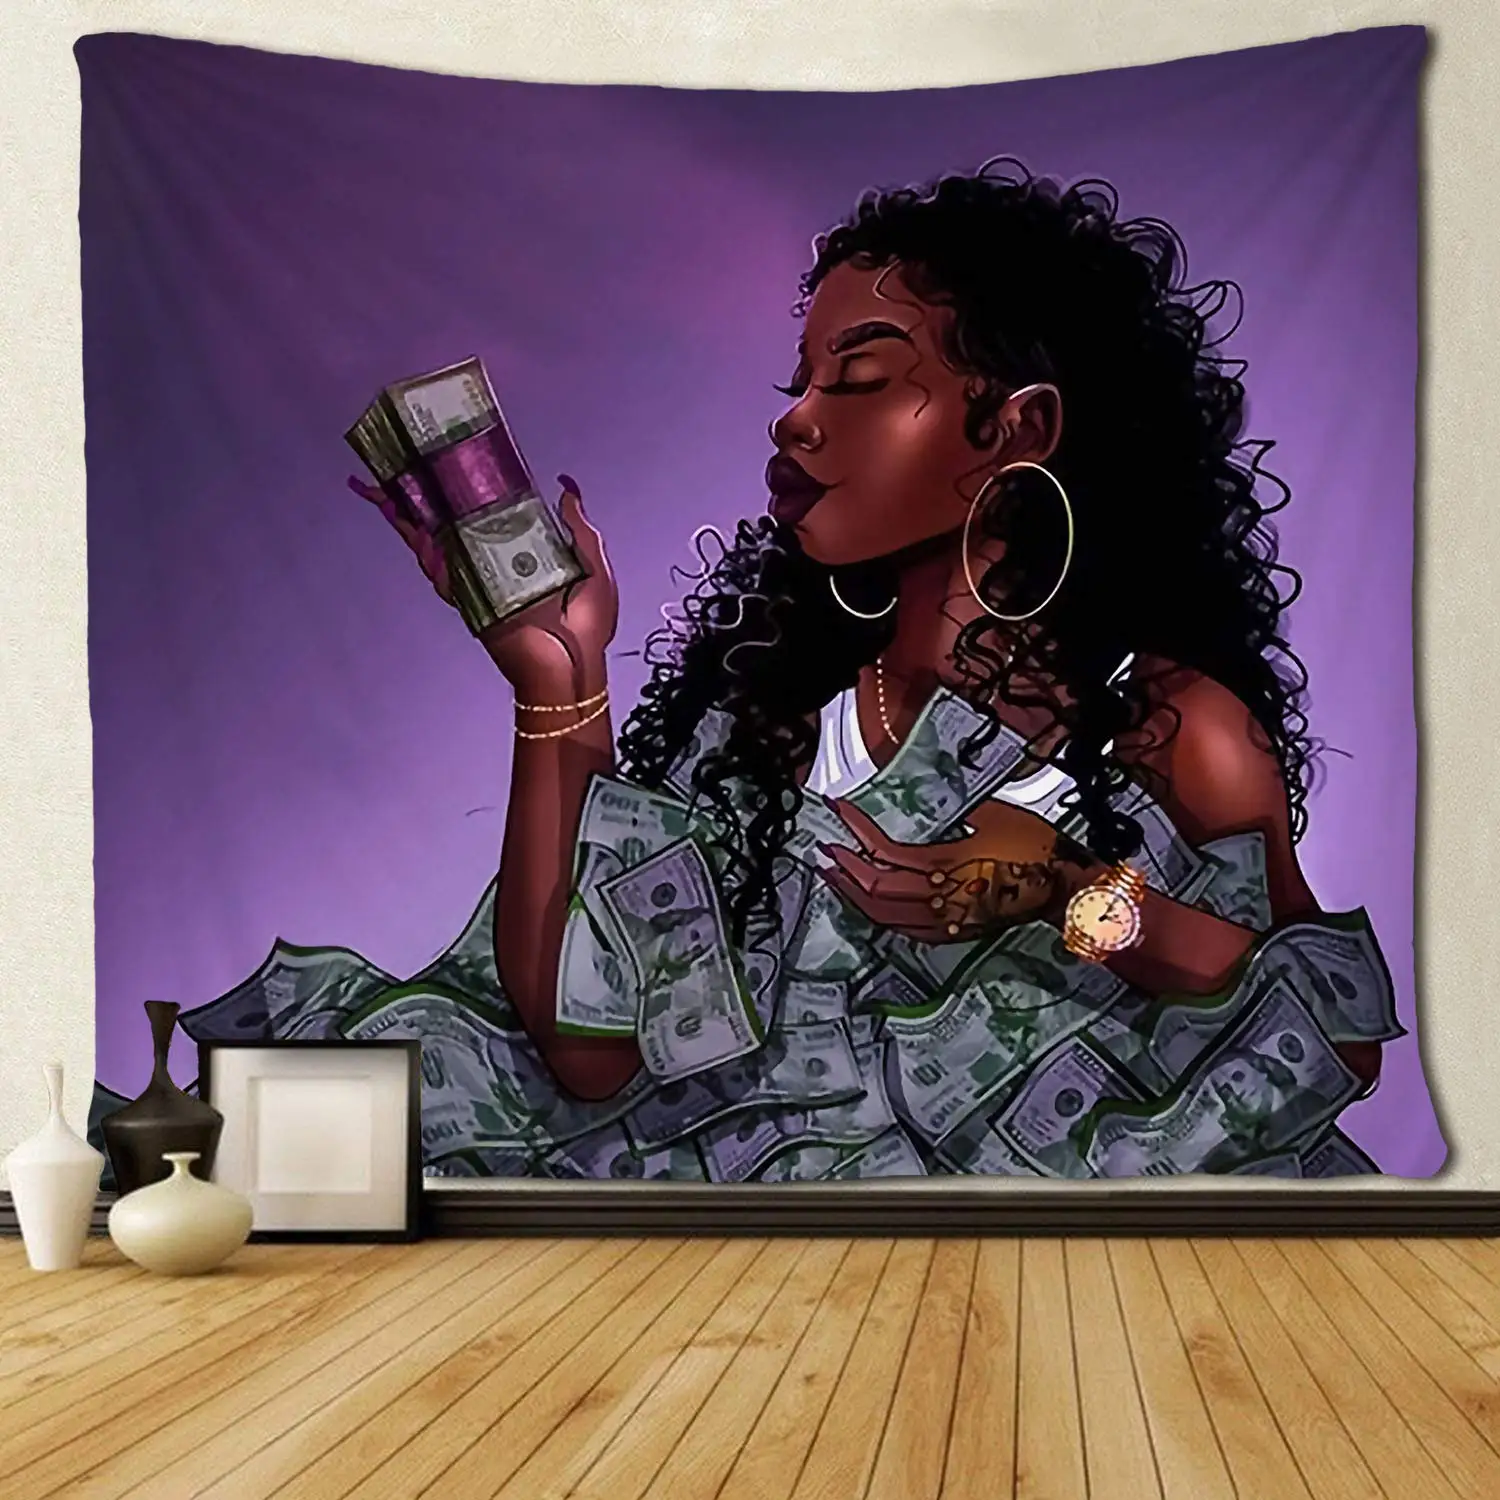 Black Art Tapestry Afro African Ameircan Women Girl Love Us Dollor Money Wall Hanging